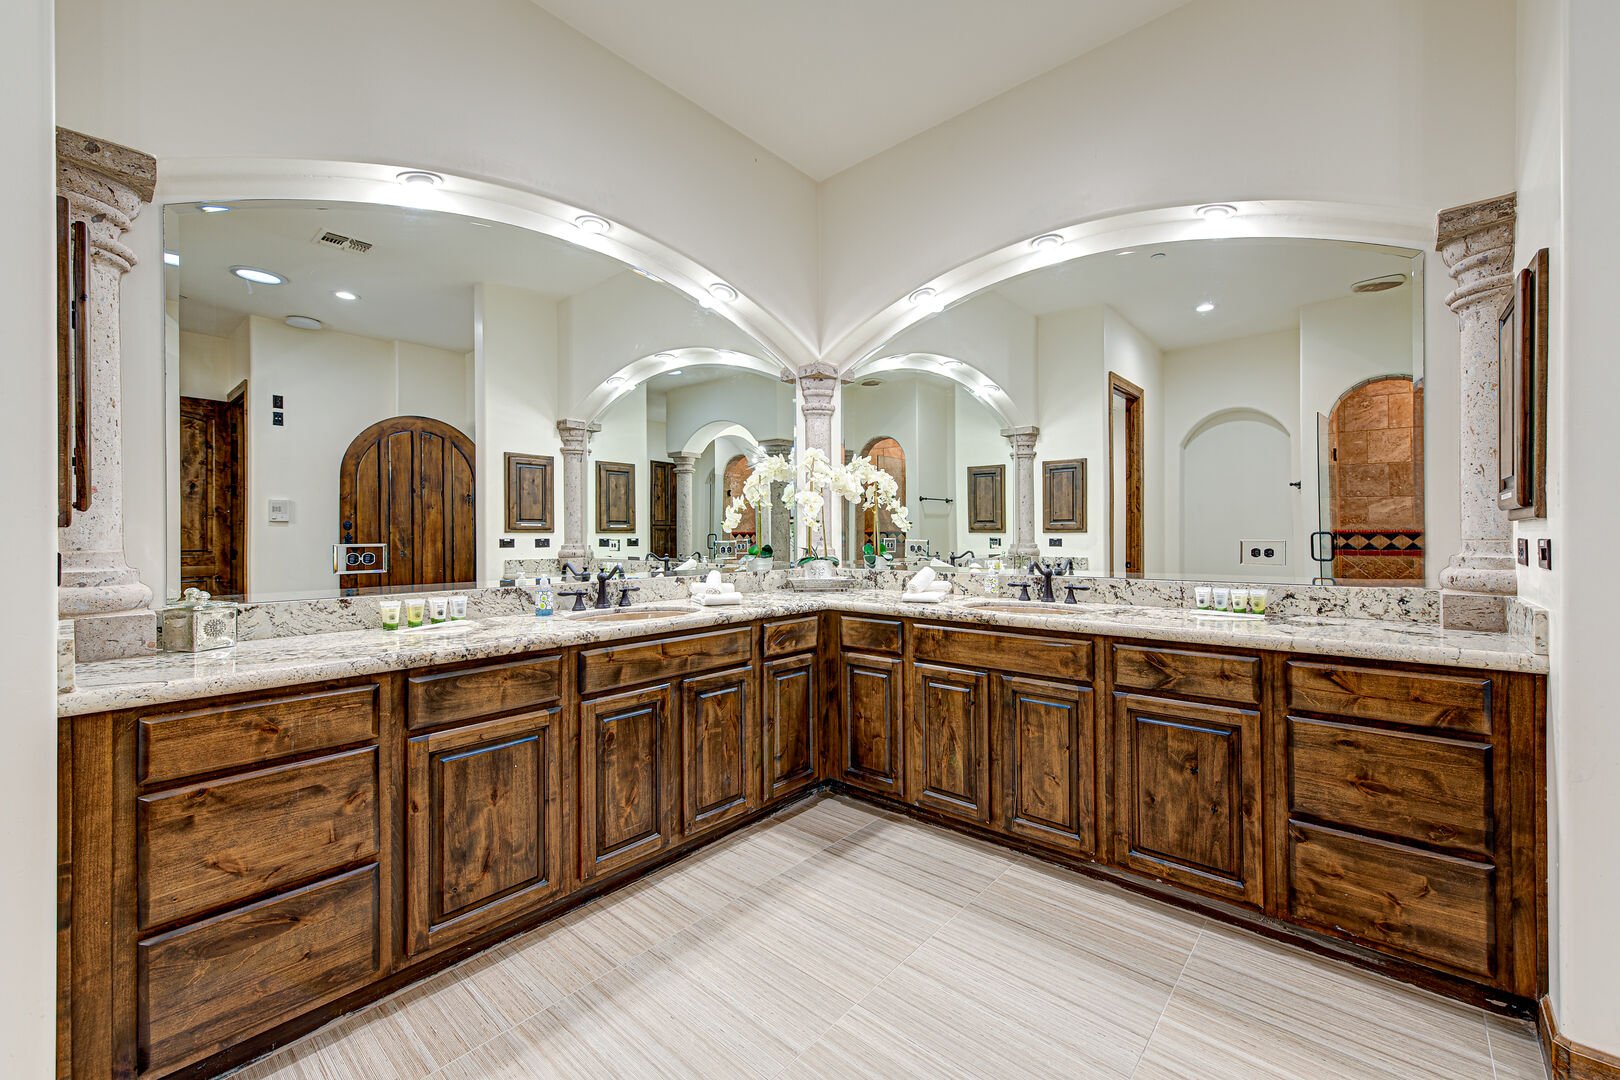 Master Suite 1 bathroom at Casa Palacio, lavishly appointed space combines exquisite design with high-end fixtures.